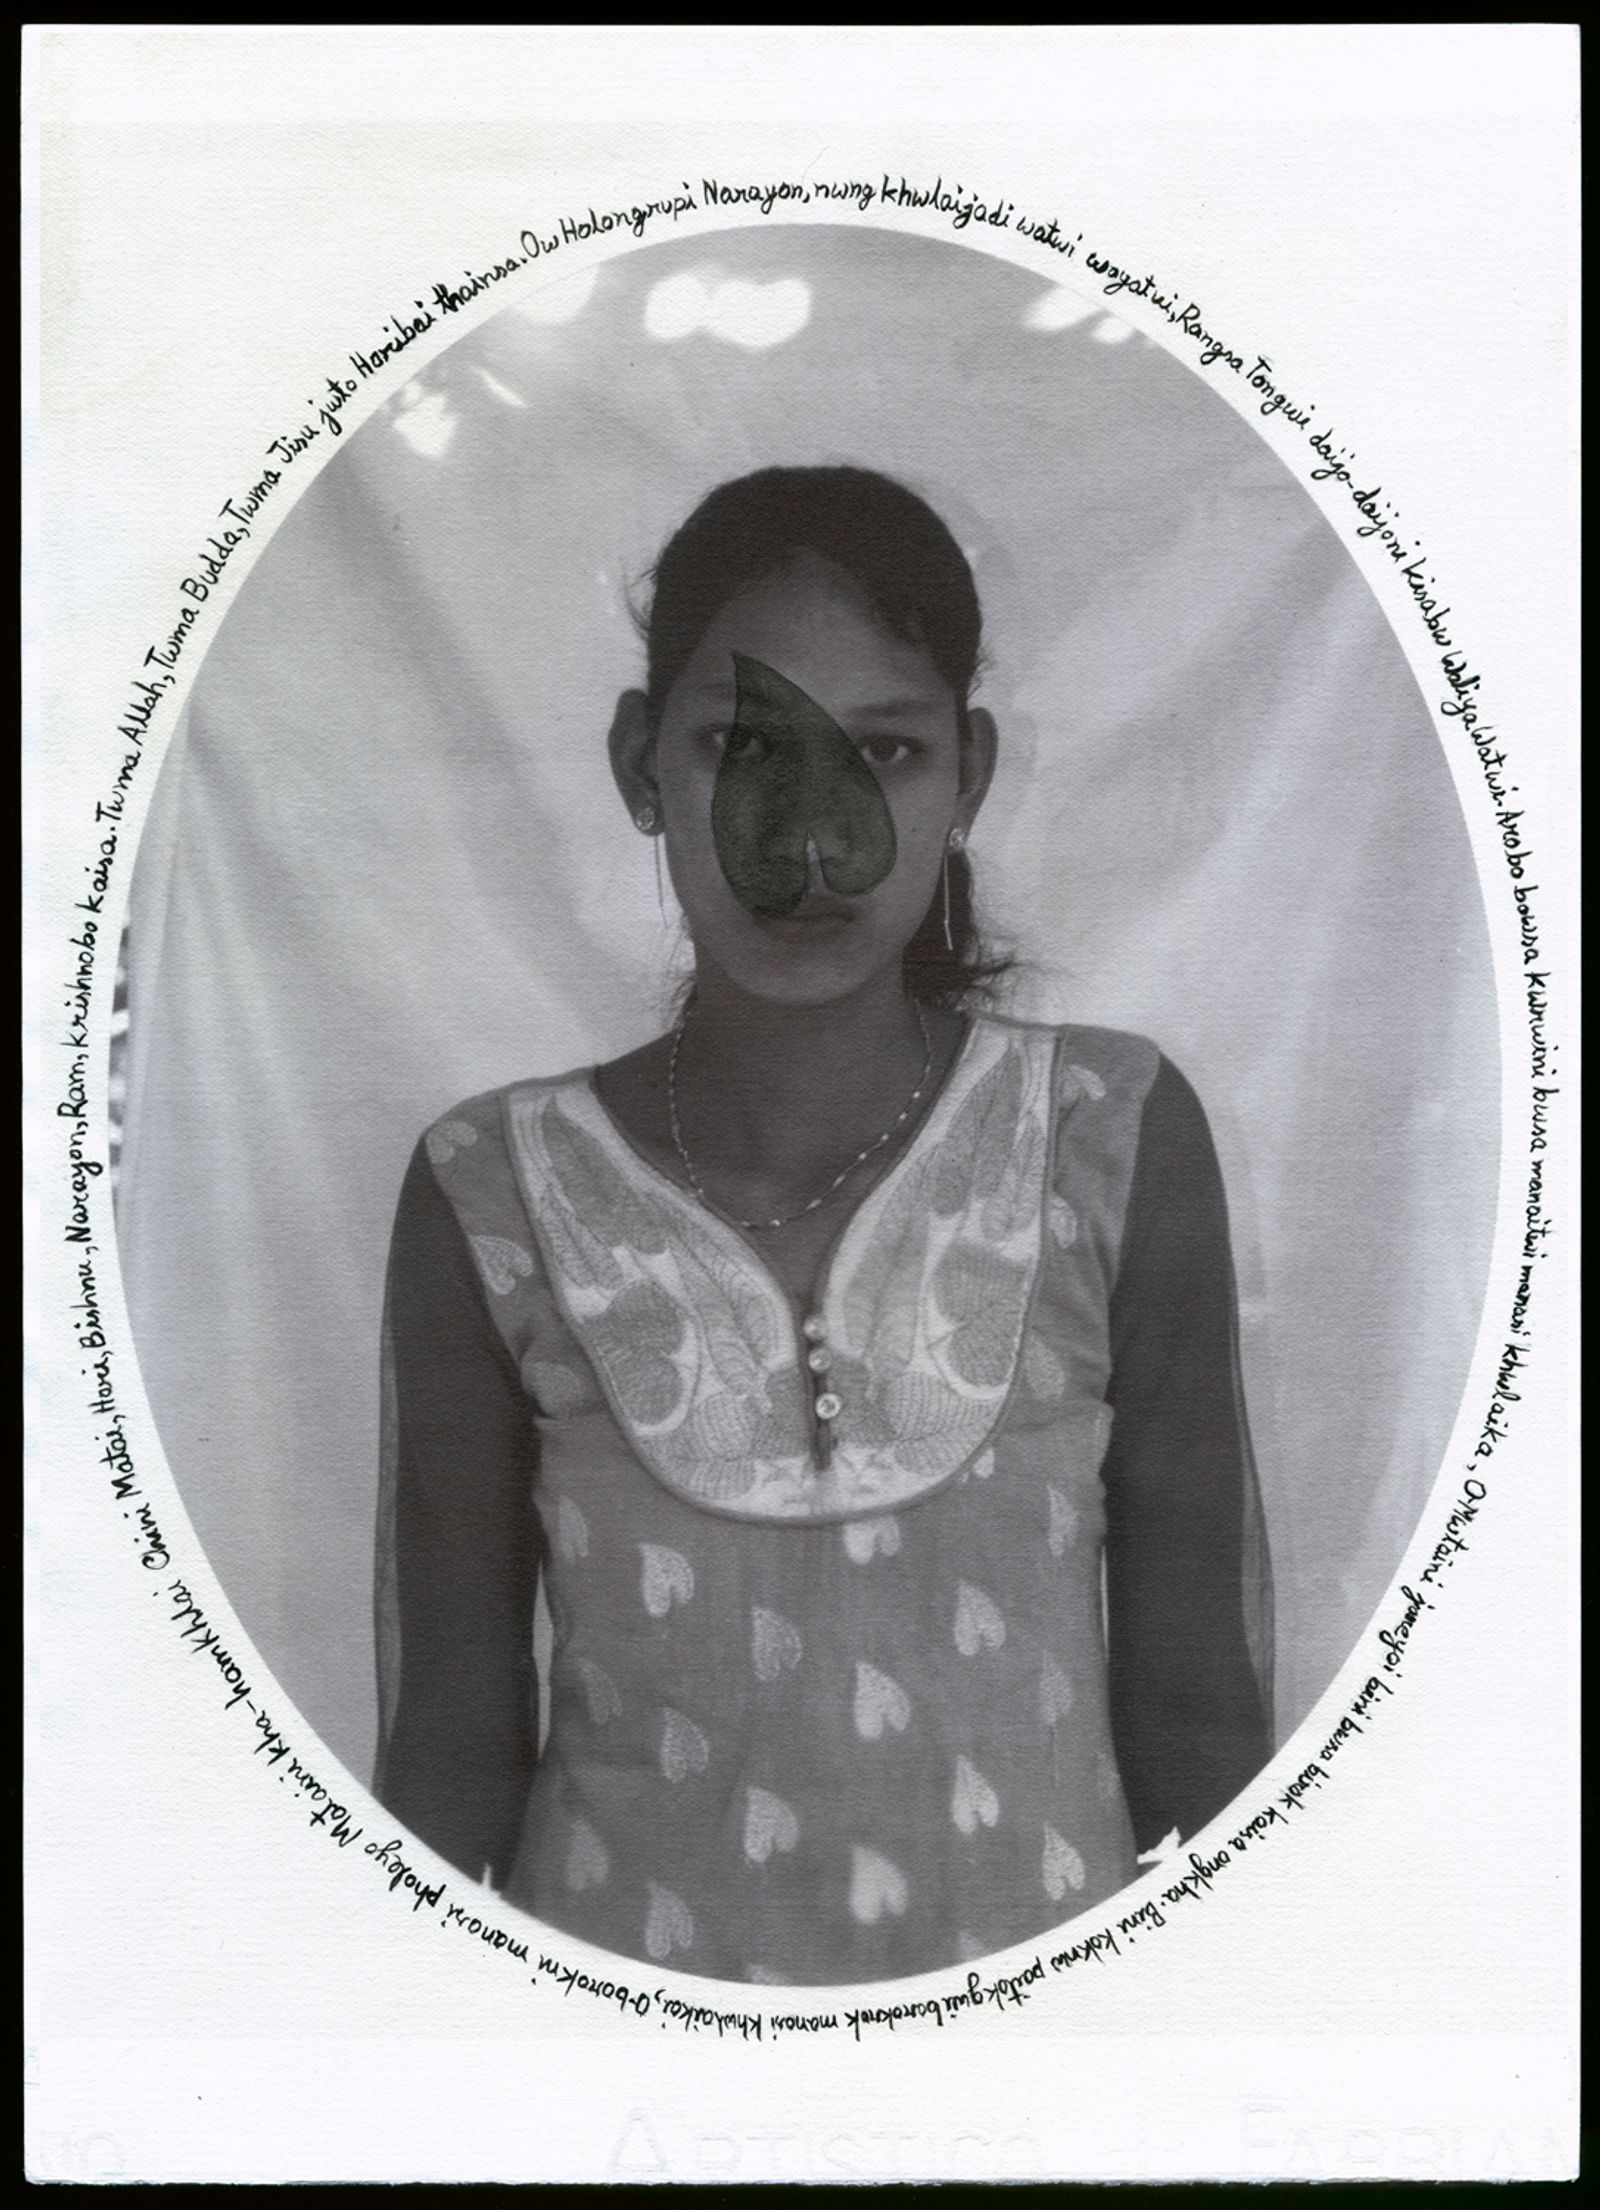 © Ashfika Rahman - Image from the Rape is Political  photography project